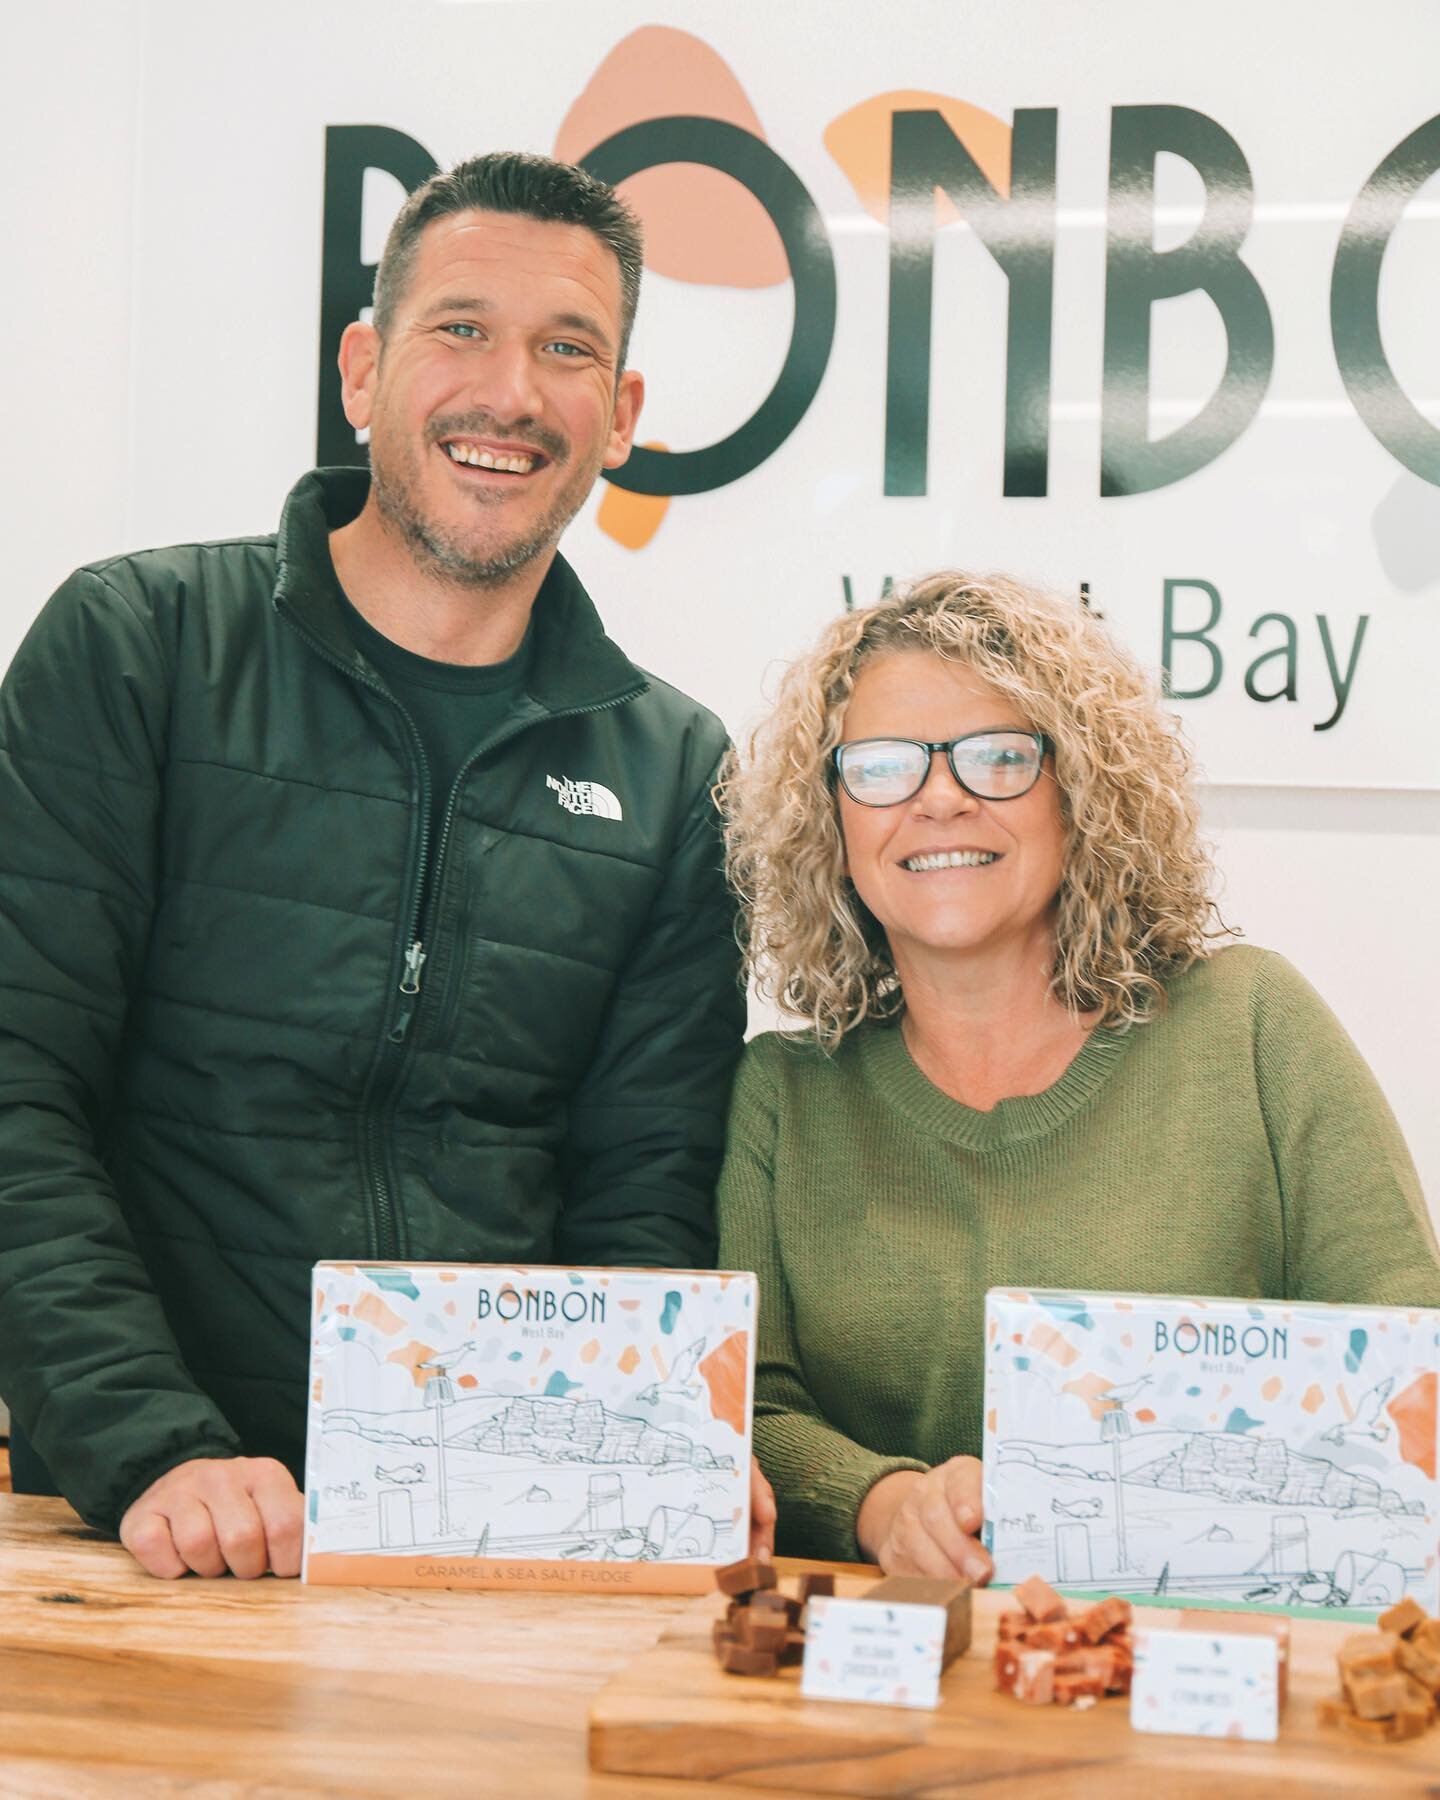 LIKE A LOCAL
Welcome to West Bay! 
So excited to have @bonbon.westbay join us at the bay! 
If you&rsquo;ve got a sweet tooth they&rsquo;re definitely the place to go! 
(And if you&rsquo;re looking for some lovely gifts look no further than their sist